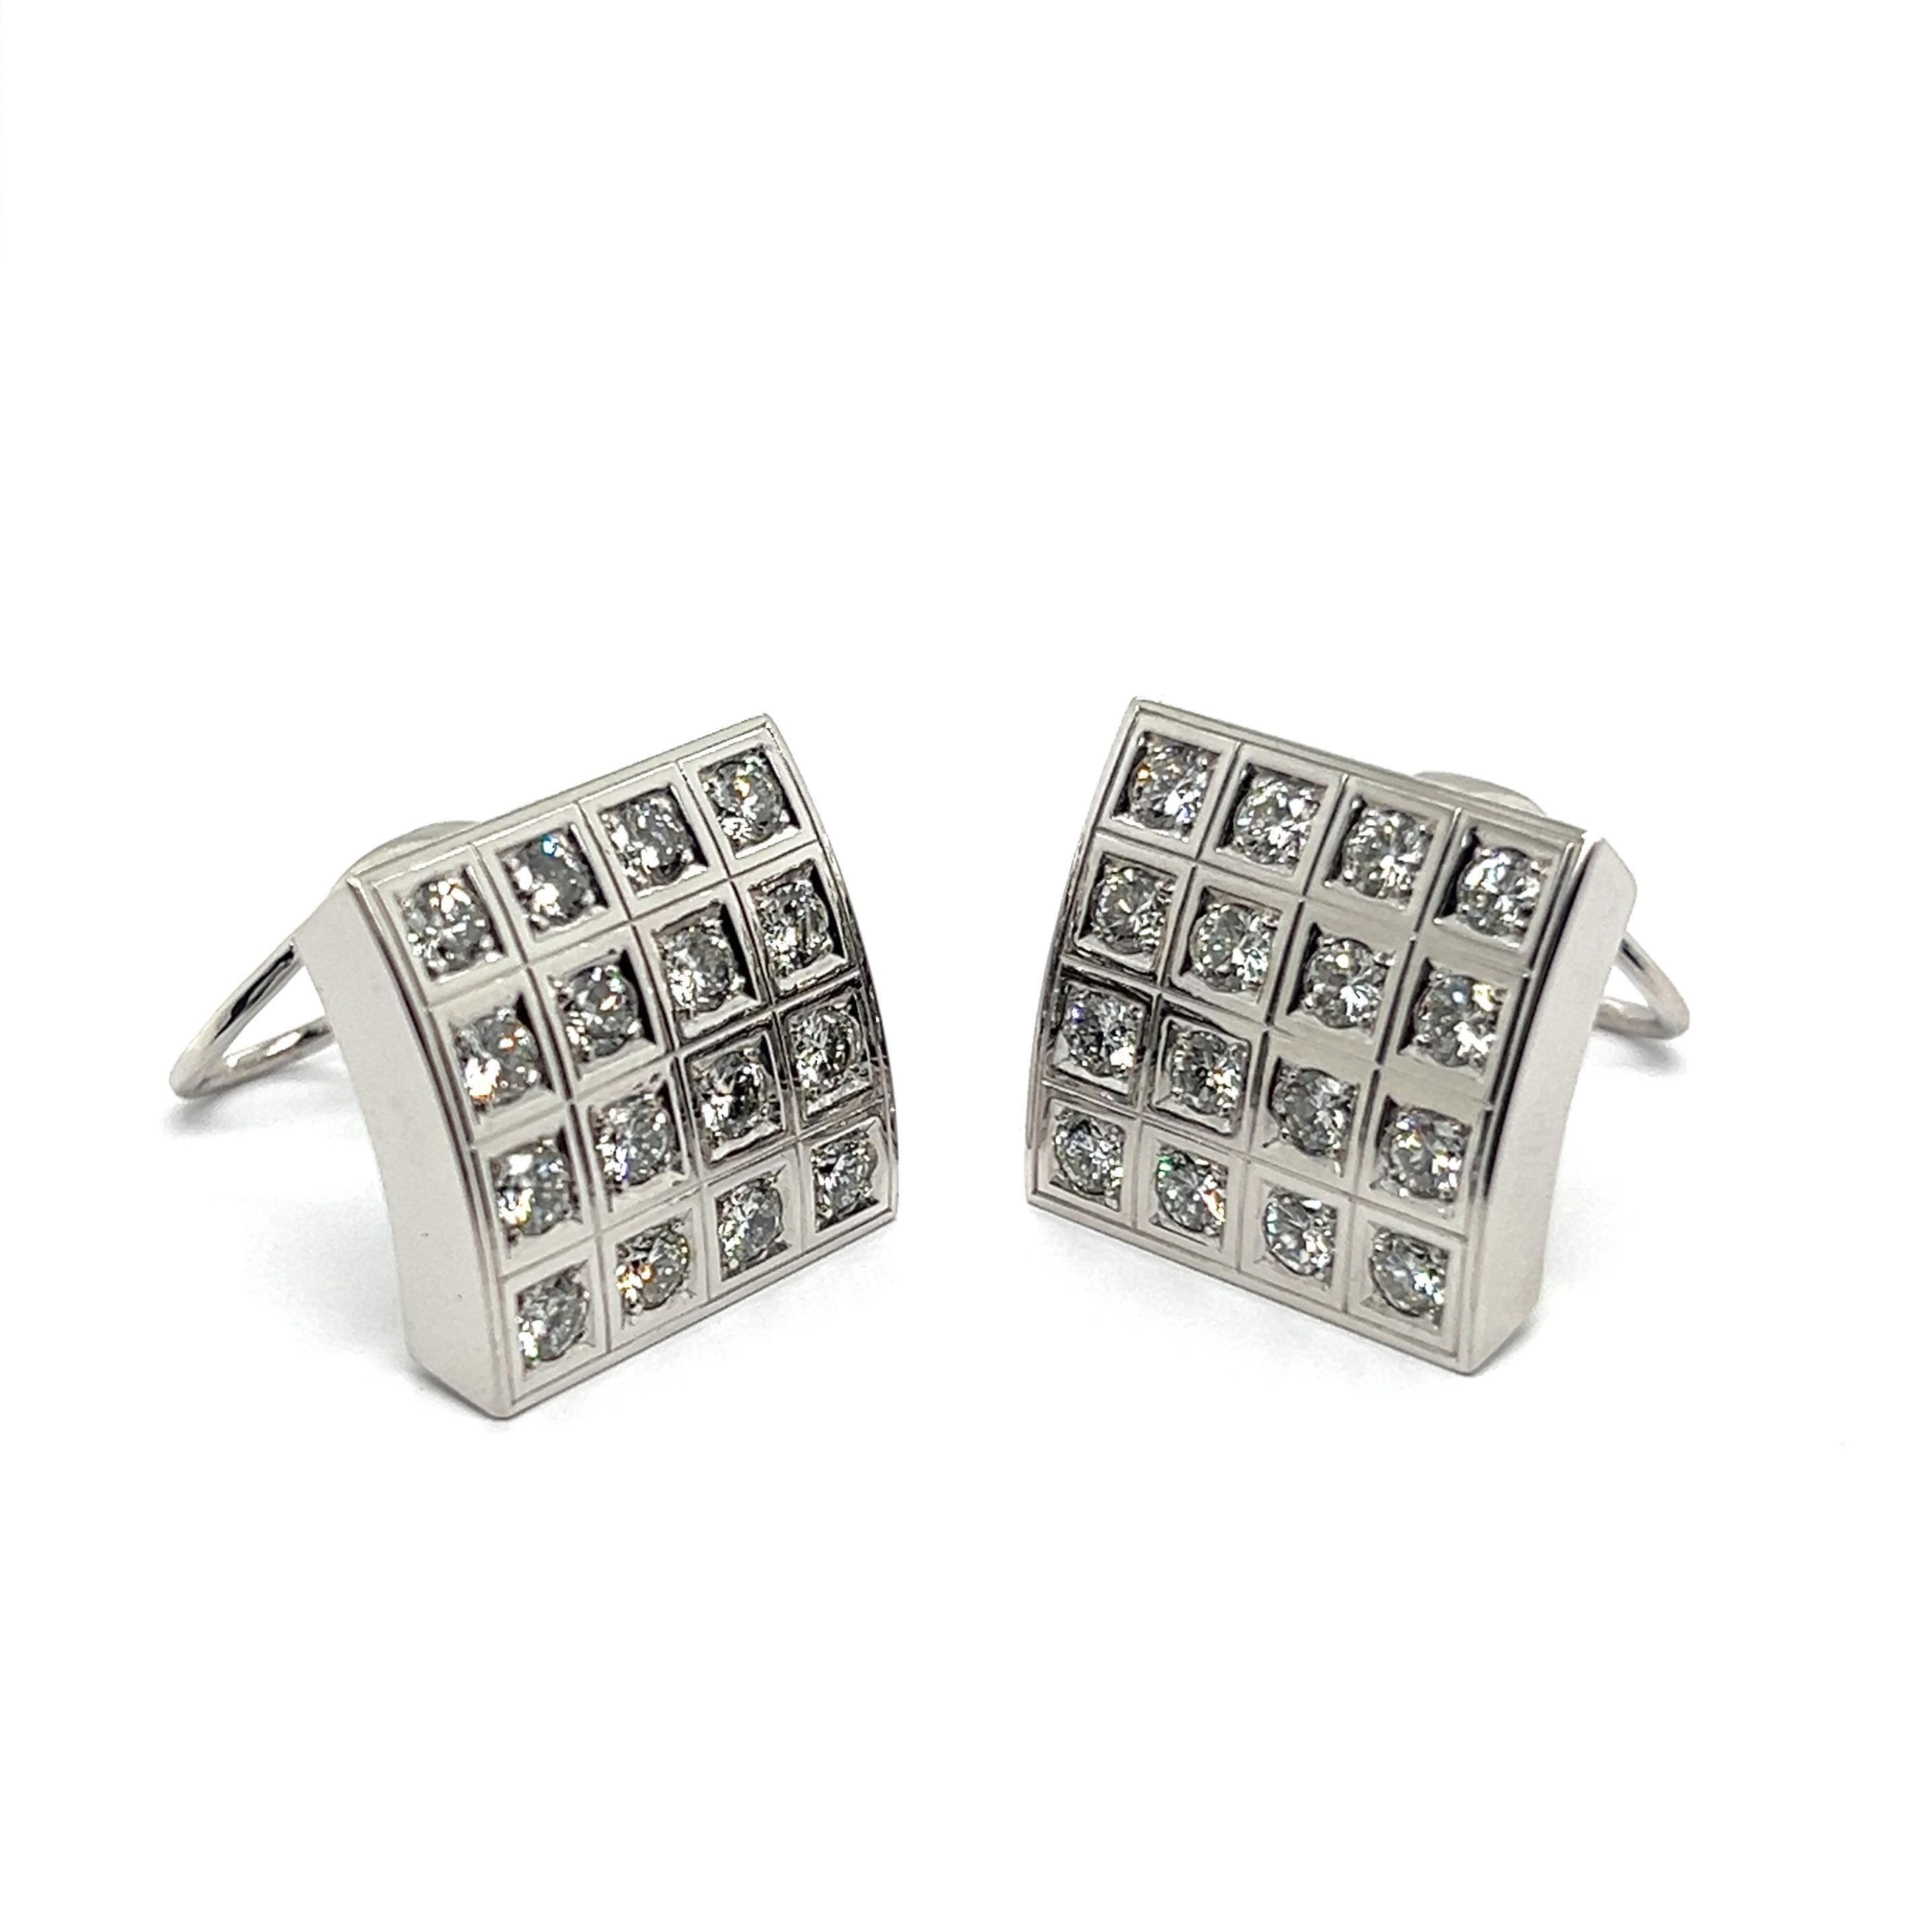  Bold Graphic Earrings with Diamonds in 18 Karat White Gold by Majo Fruithof 6